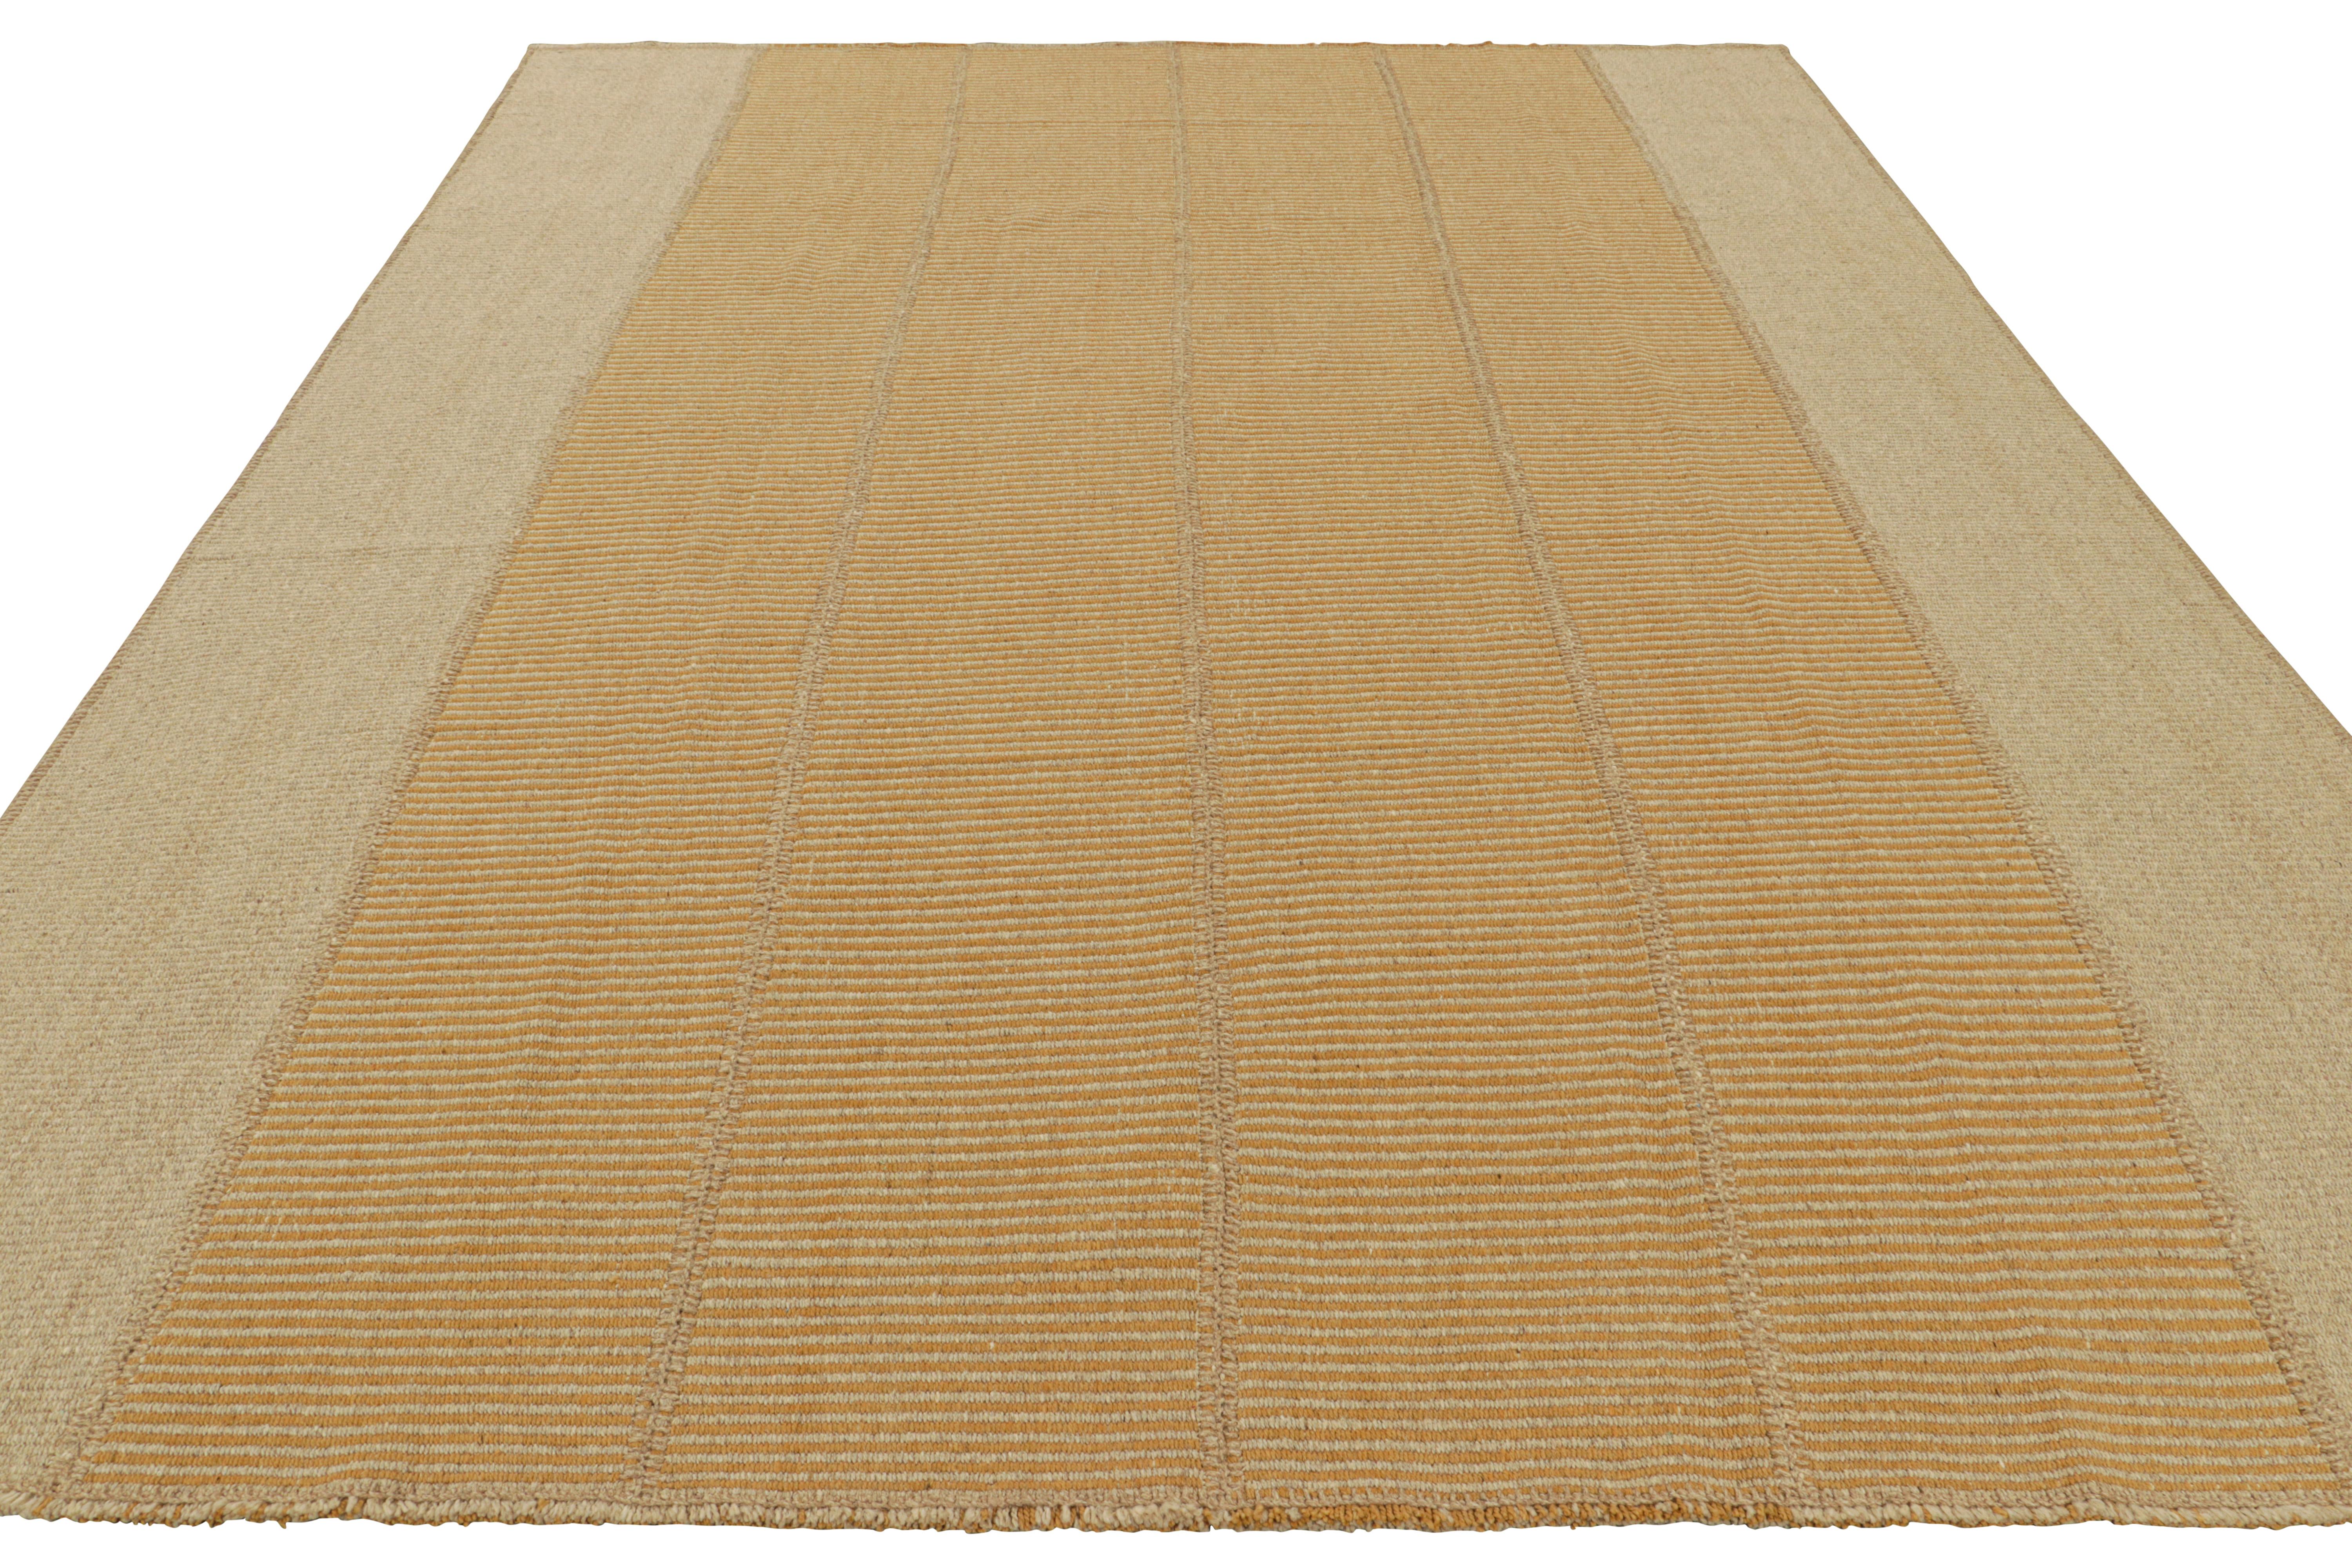 Hand-Woven Rug & Kilim’s Contemporary Kilim in Beige and Orange Textural Stripes For Sale